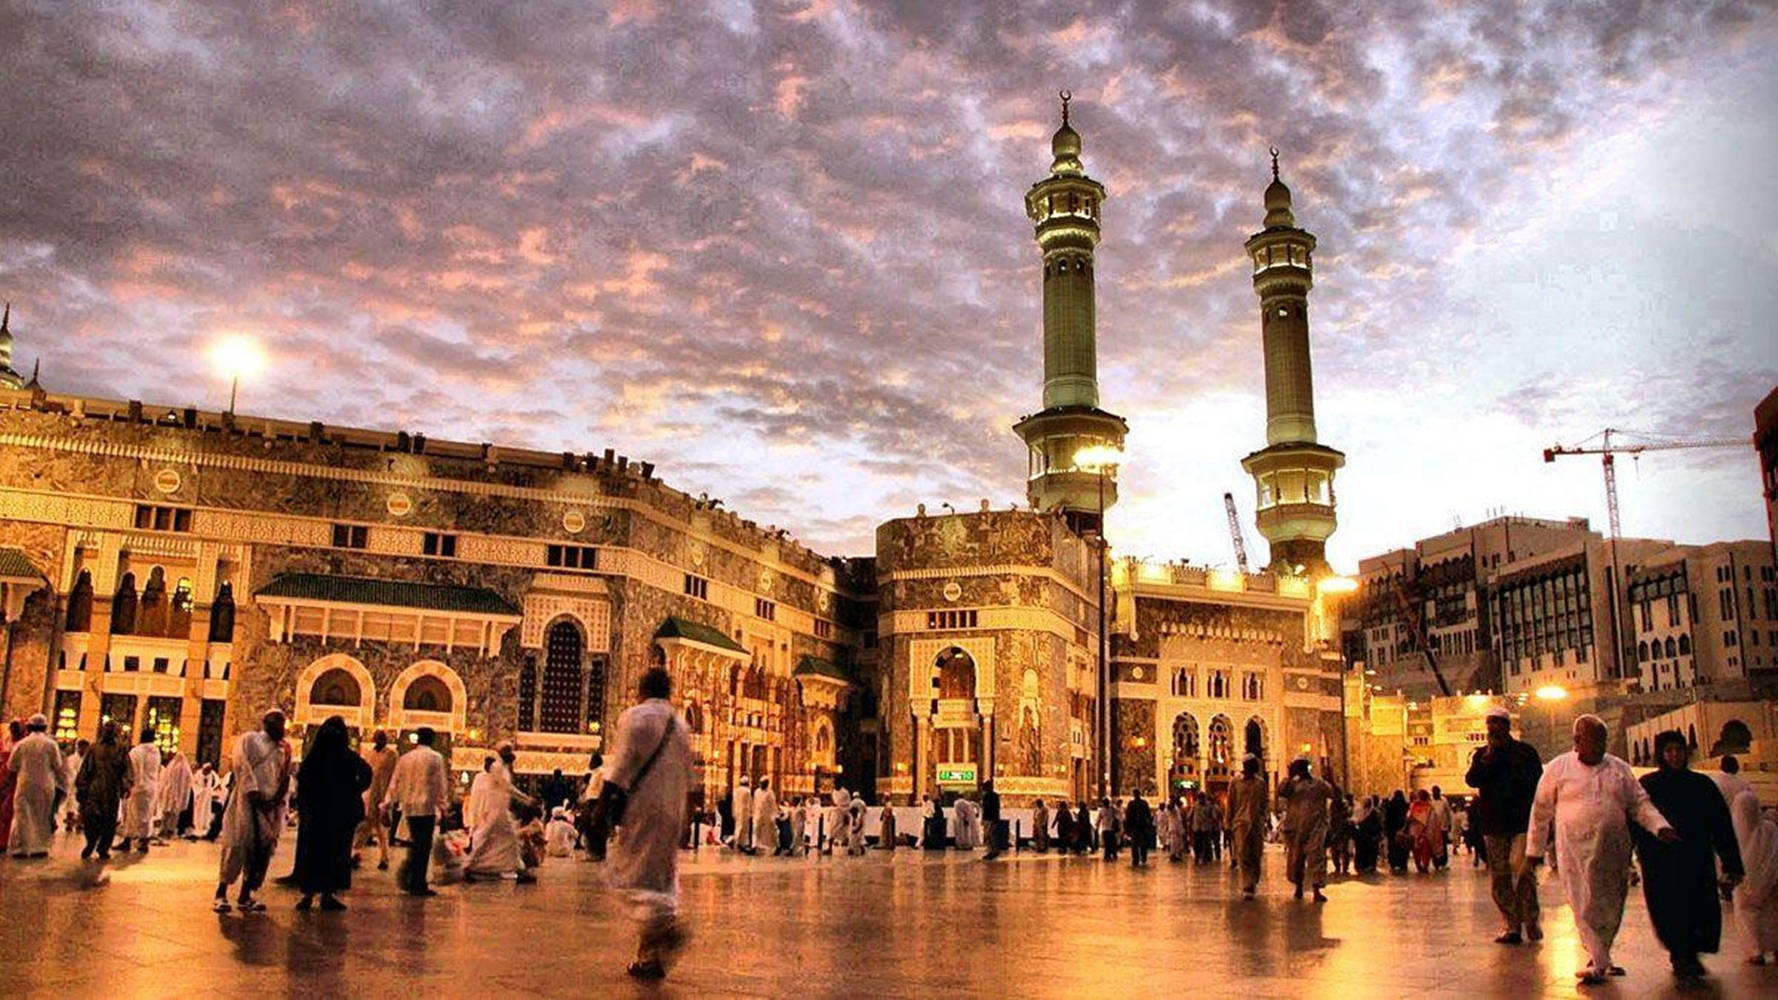 Masjid alHaram With Lights During Nighttime HD Ramzan Wallpapers  HD  Wallpapers  ID 67834